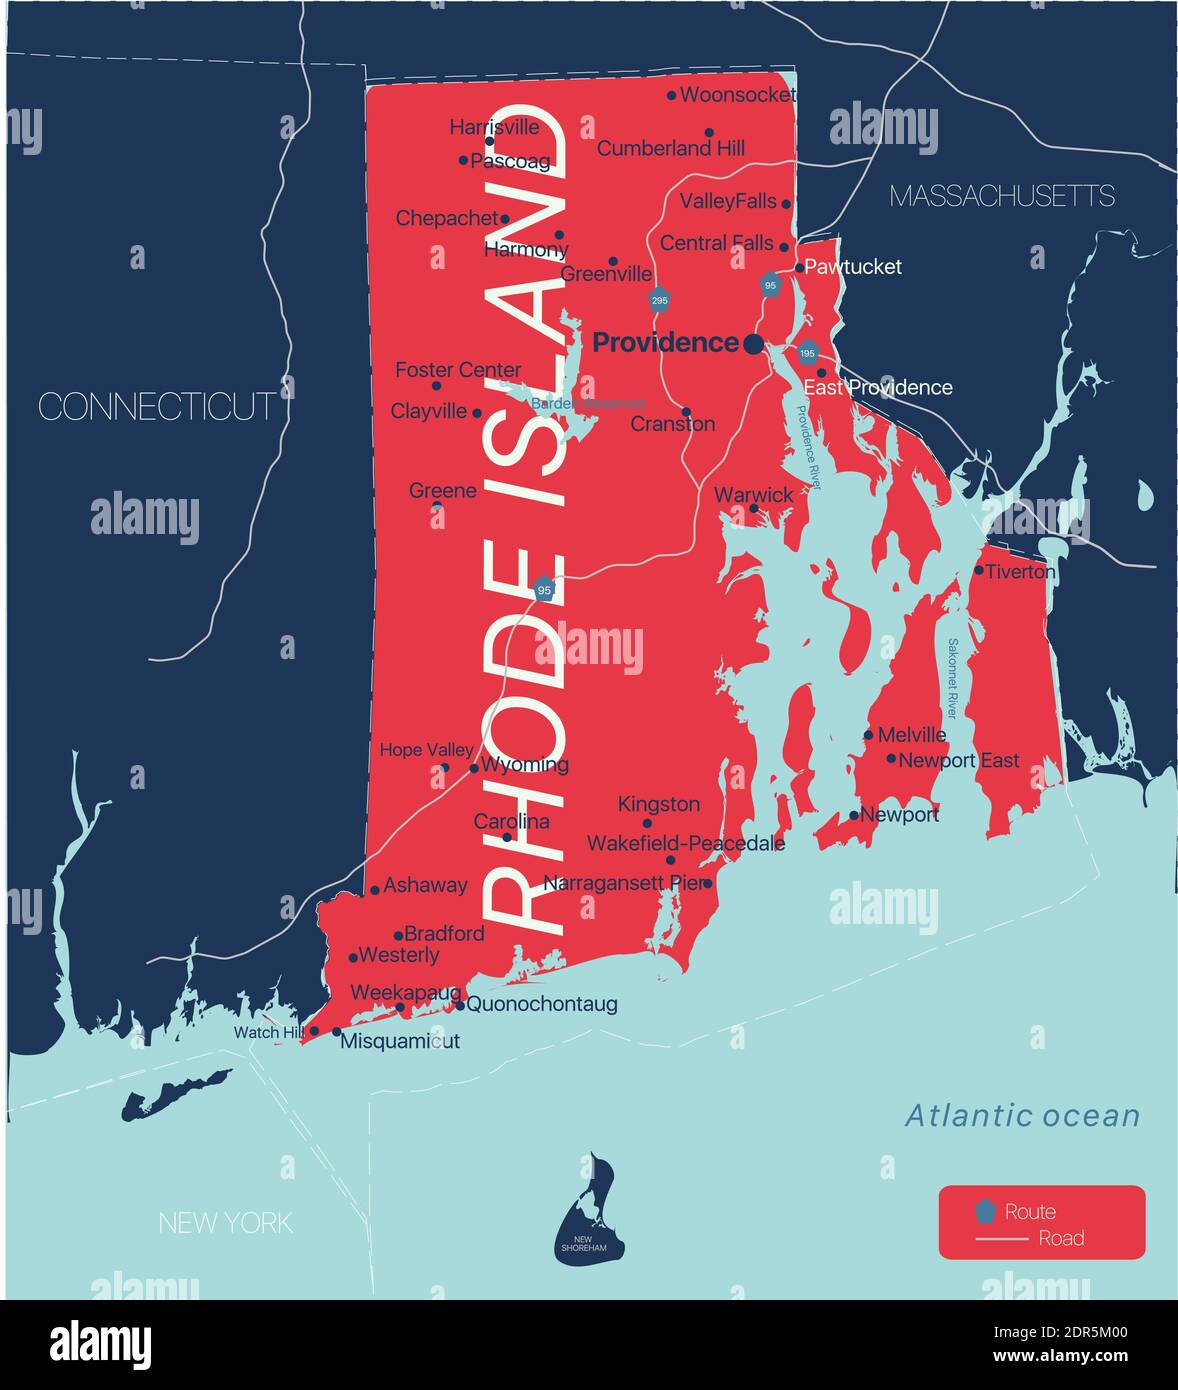 Rhode Island state detailed editable map with cities and towns, geographic sites, roads, railways, interstates and U.S. highways. Vector EPS-10 file, Stock Vector